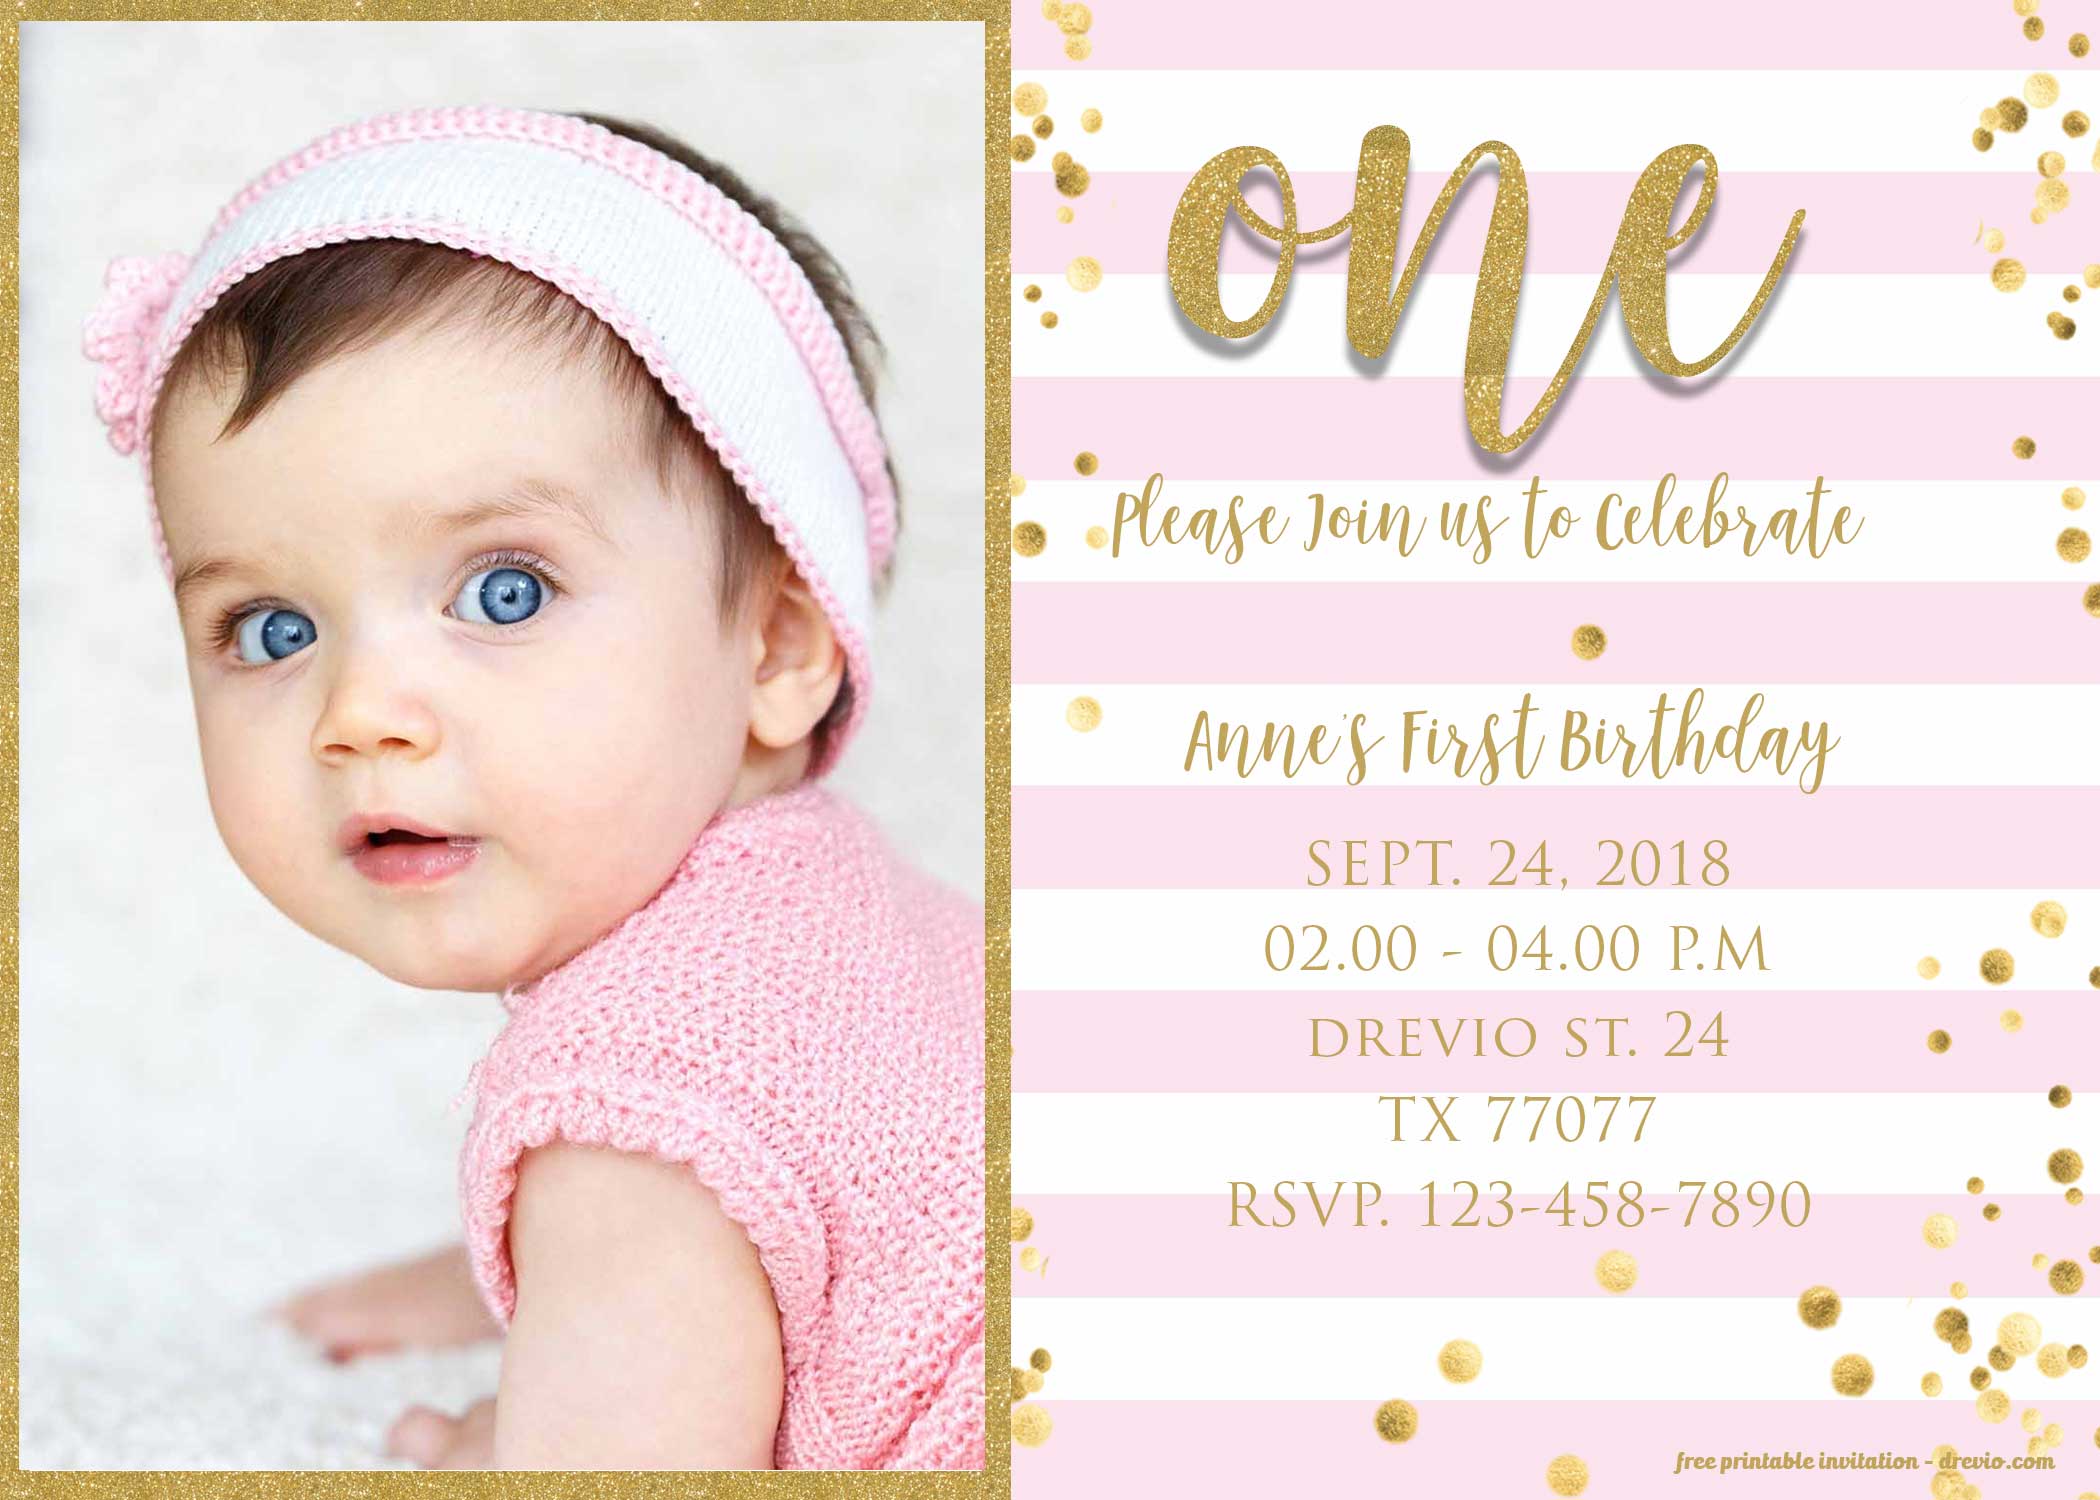 FREE 20st Birthday Invitation Pink and Gold glitter Template In First Birthday Invitation Card Template